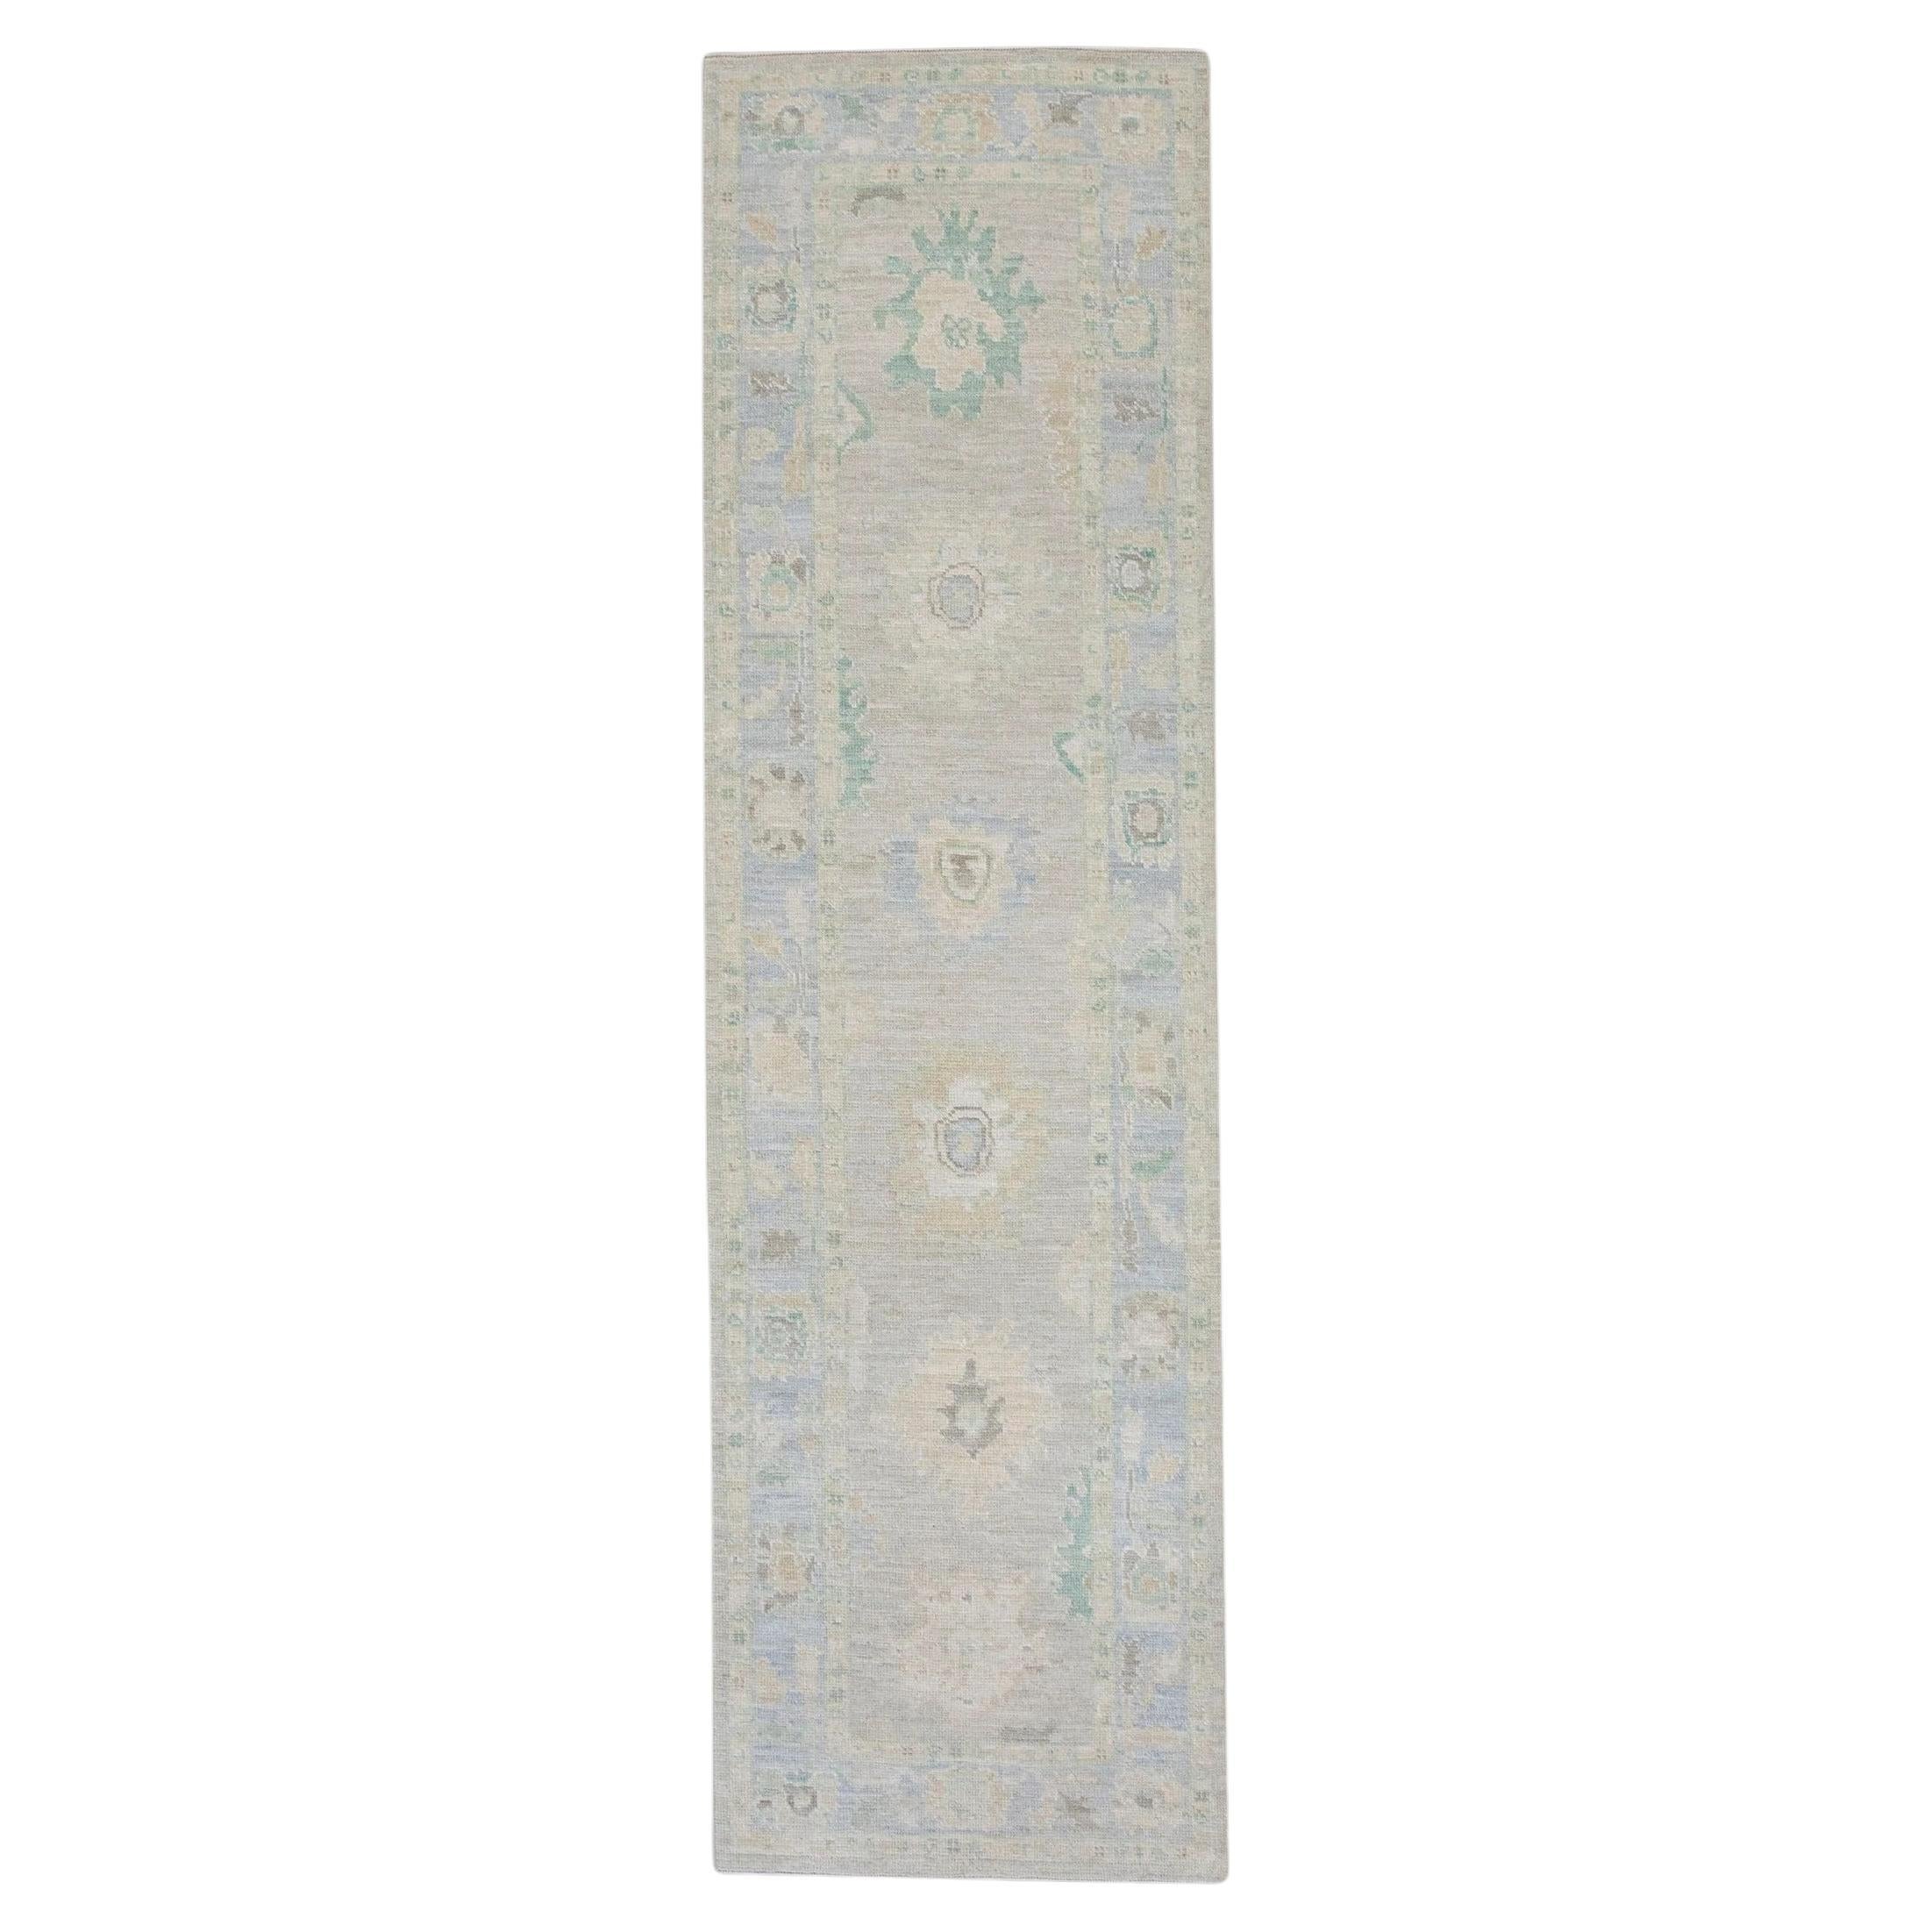 Blue Floral Handwoven Wool Turkish Oushak Rug 3' x 10'4" For Sale